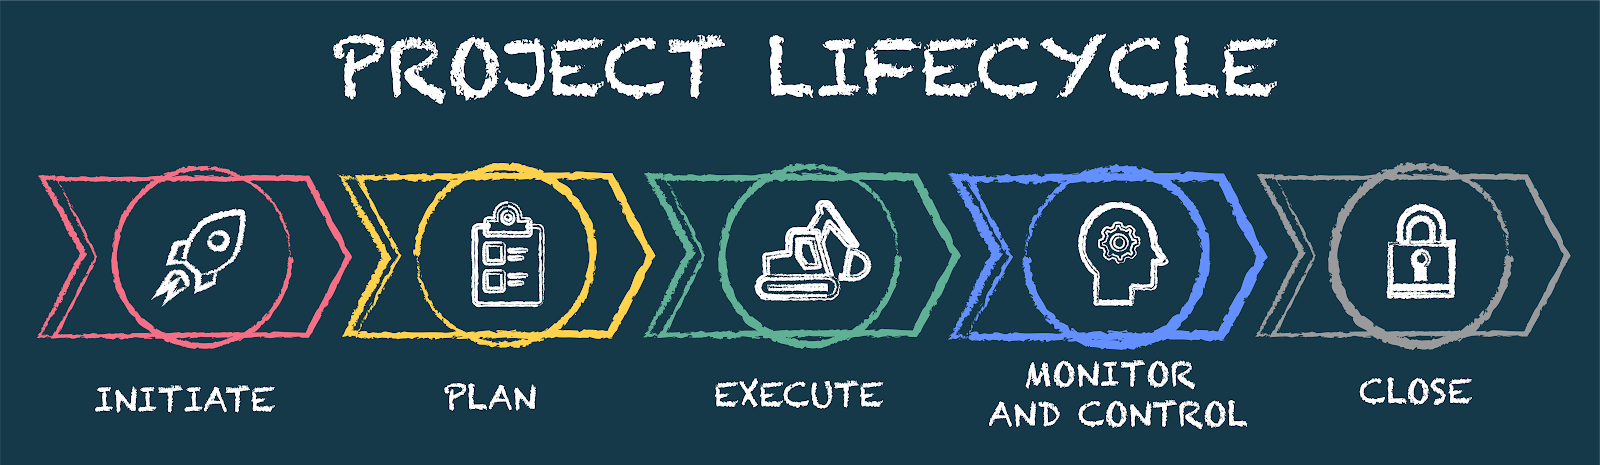 Series of icons representing the project management lifecycle phases of Initiate (rocket), Plan (clipboard), Execute (excavator), Monitor and Control (silhouette of a person‘s head with a gear in it), and Close (padlock). The image title reads Project Lifecycle.